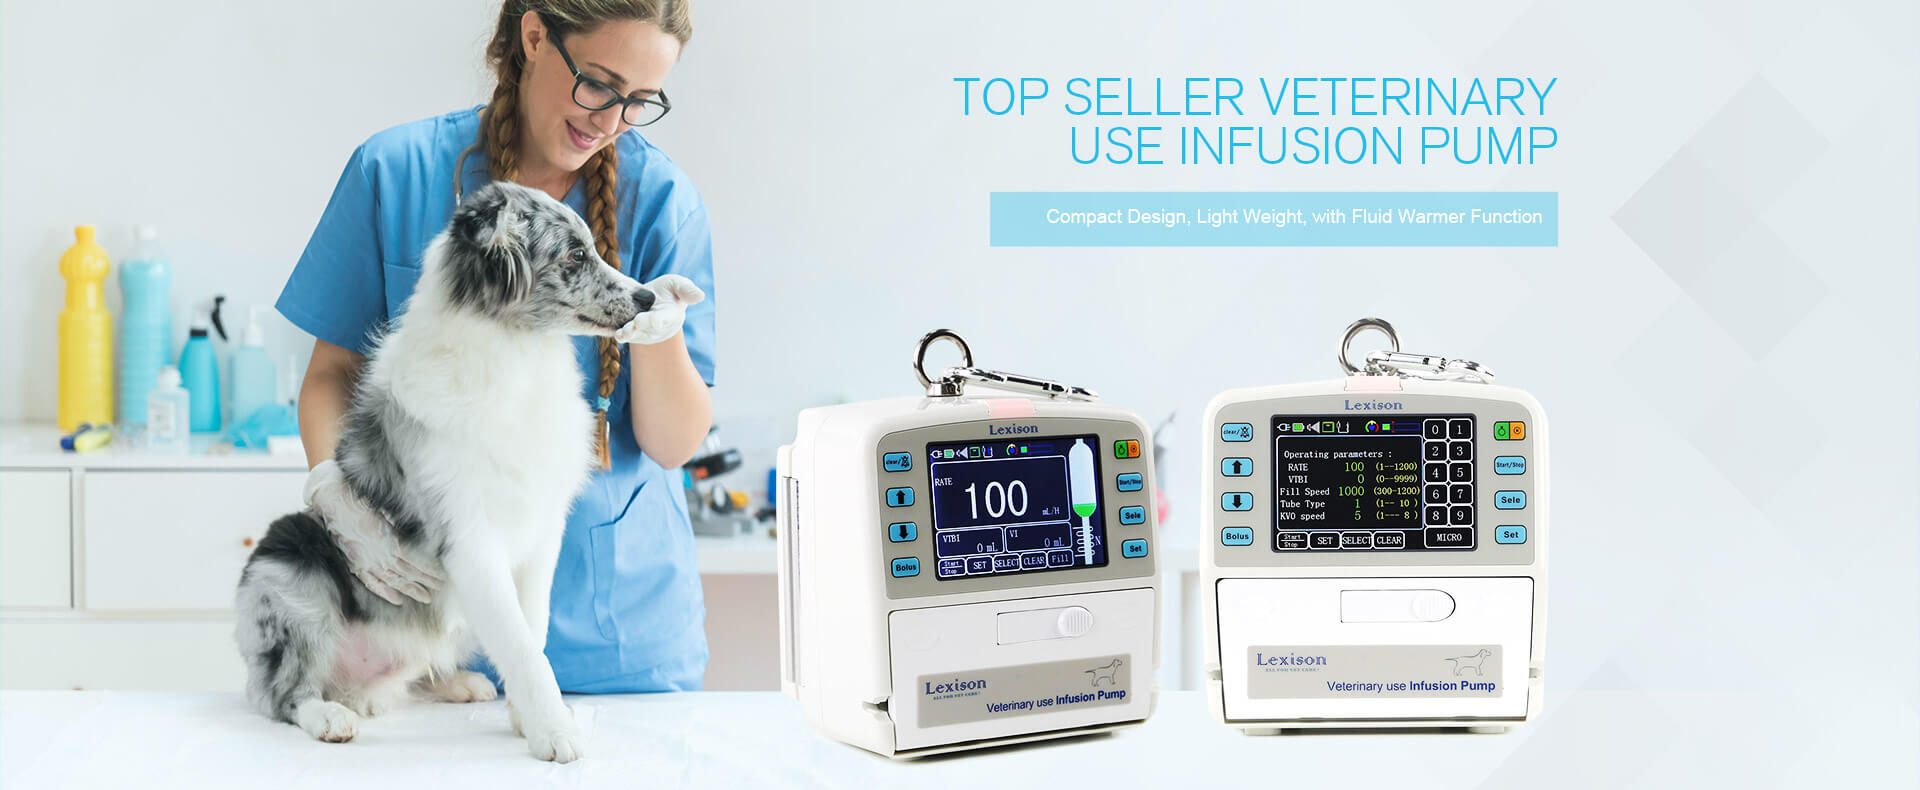 TOP SELLER Veterinary use Infusion Pump